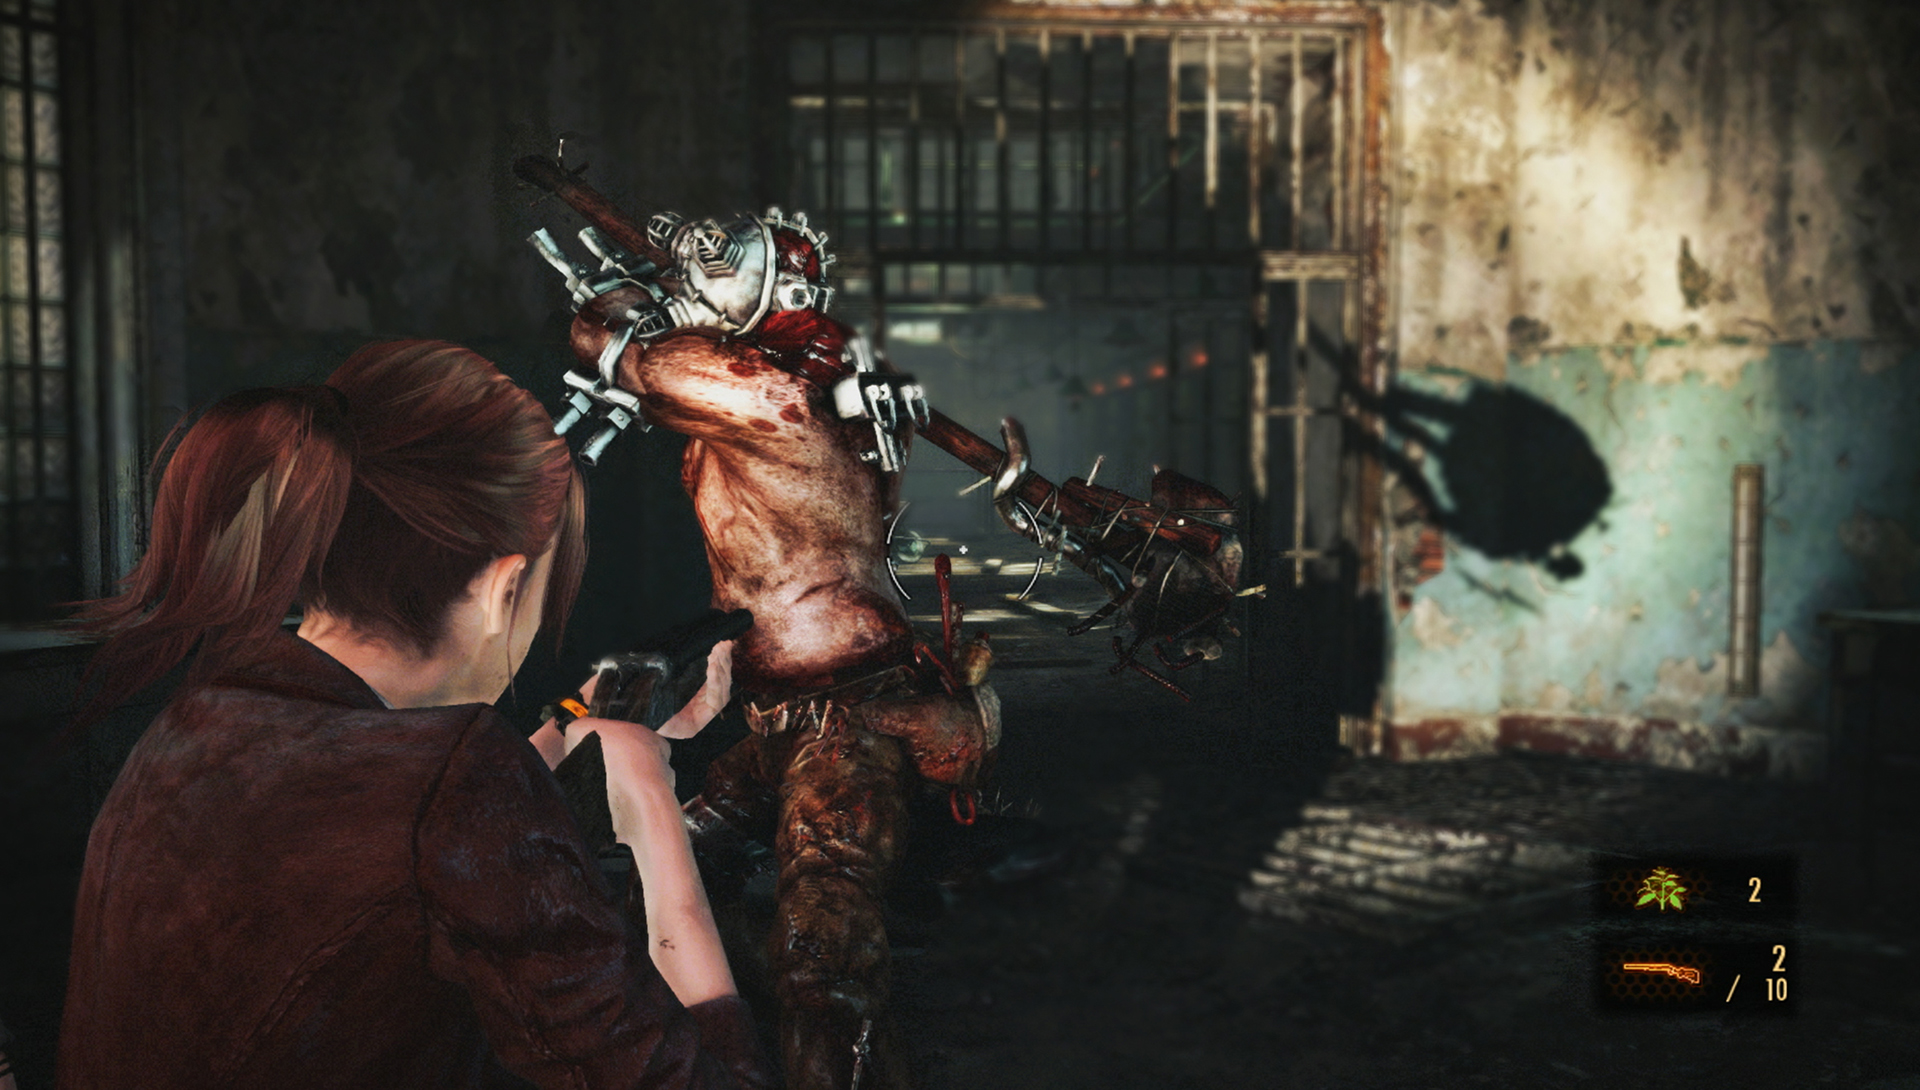 Resident evil: Revelations 2 tung video gameplay mới